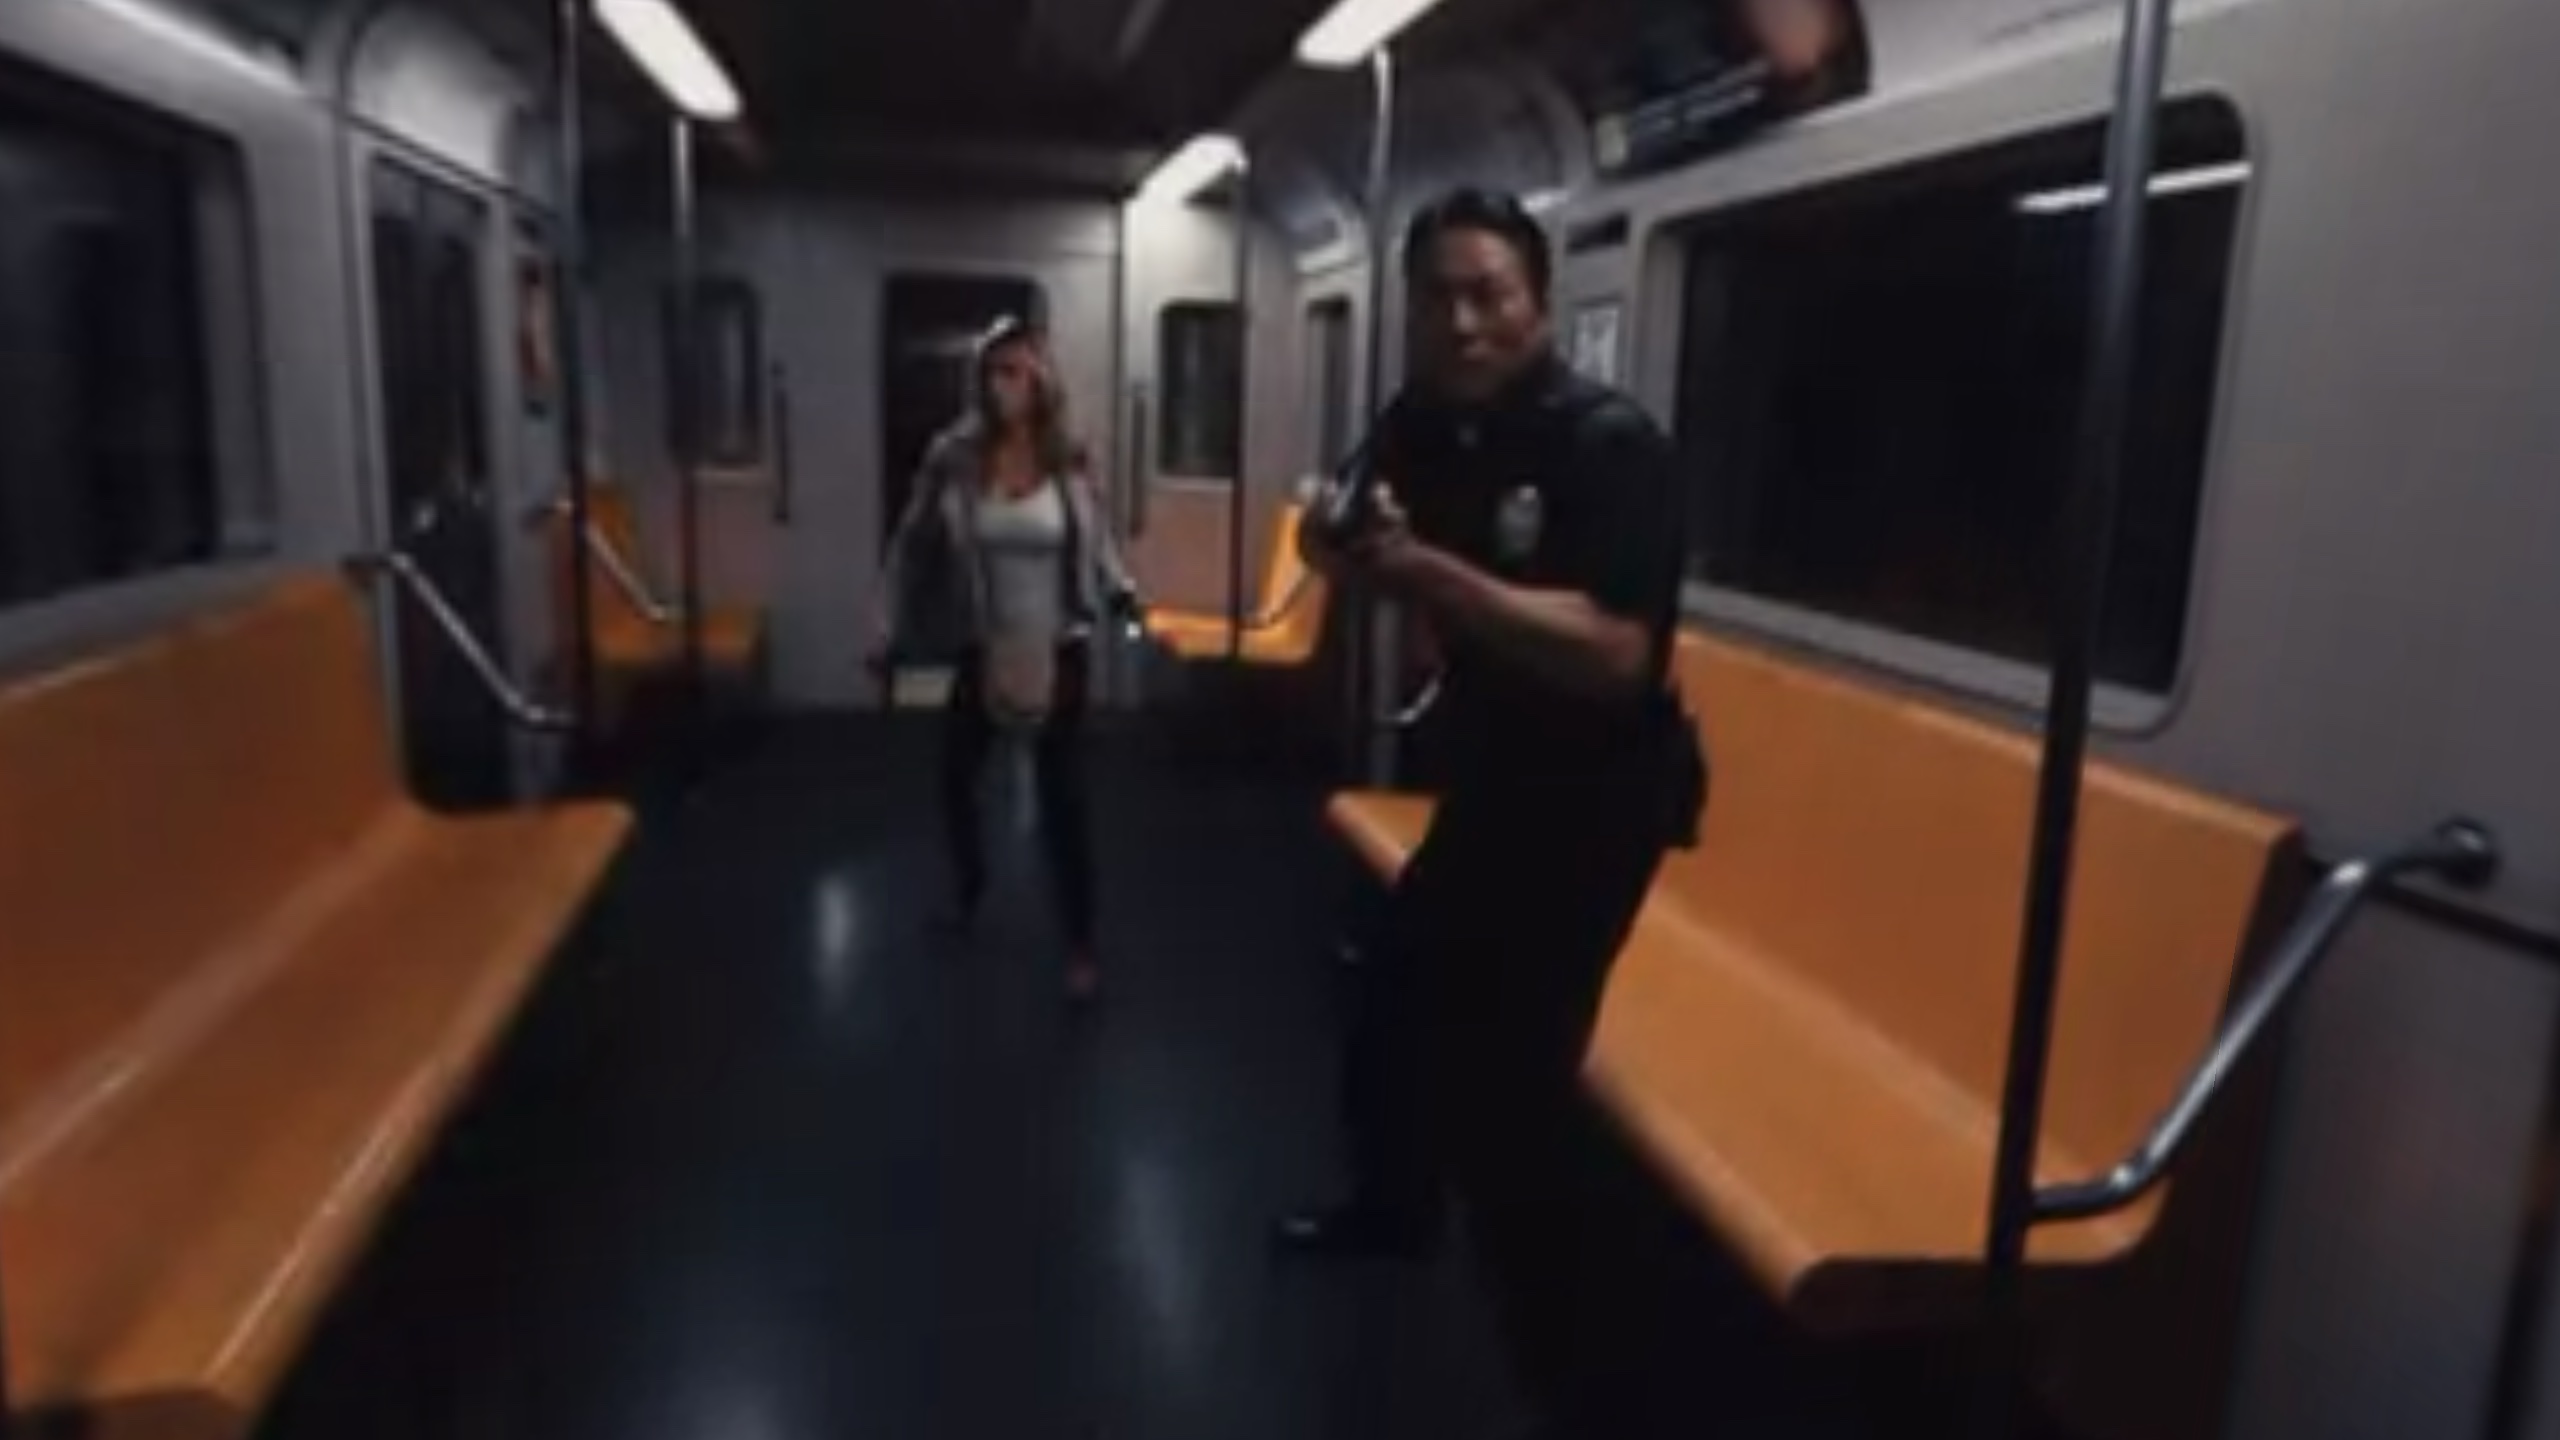 Google’s Immersive 360 Action Flick Is So Realistic It’s Not Believable